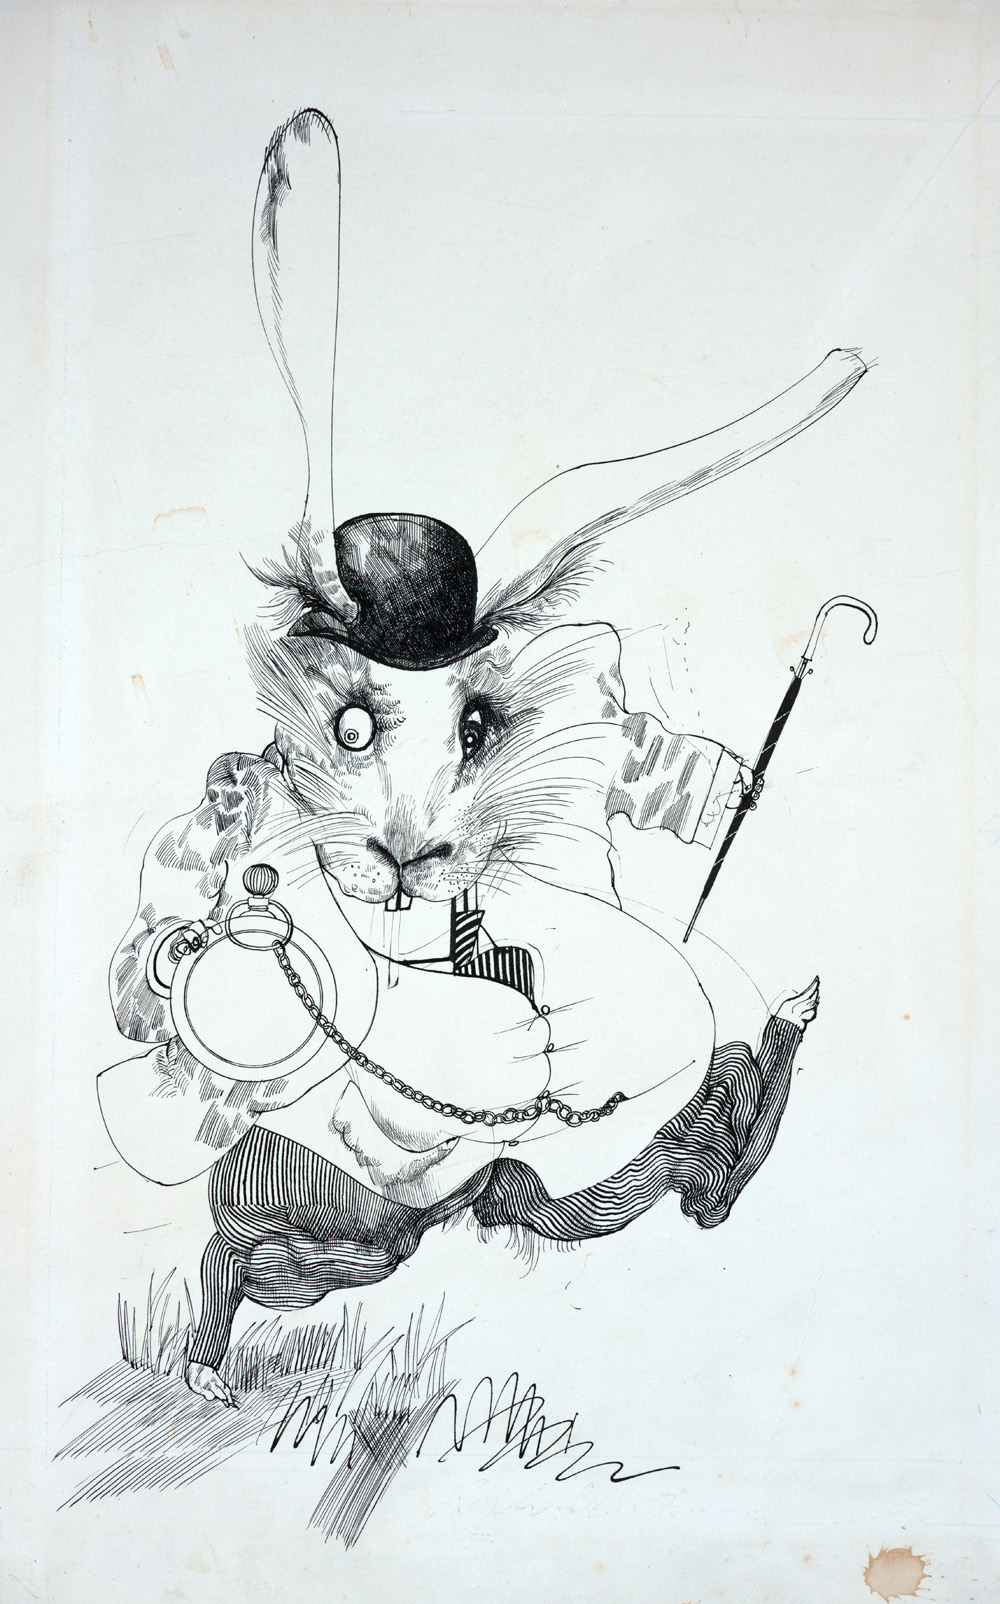 The White Rabbit illustration from Ralph Steadman's version of Alice in Wonderland, by Lewis Carrol